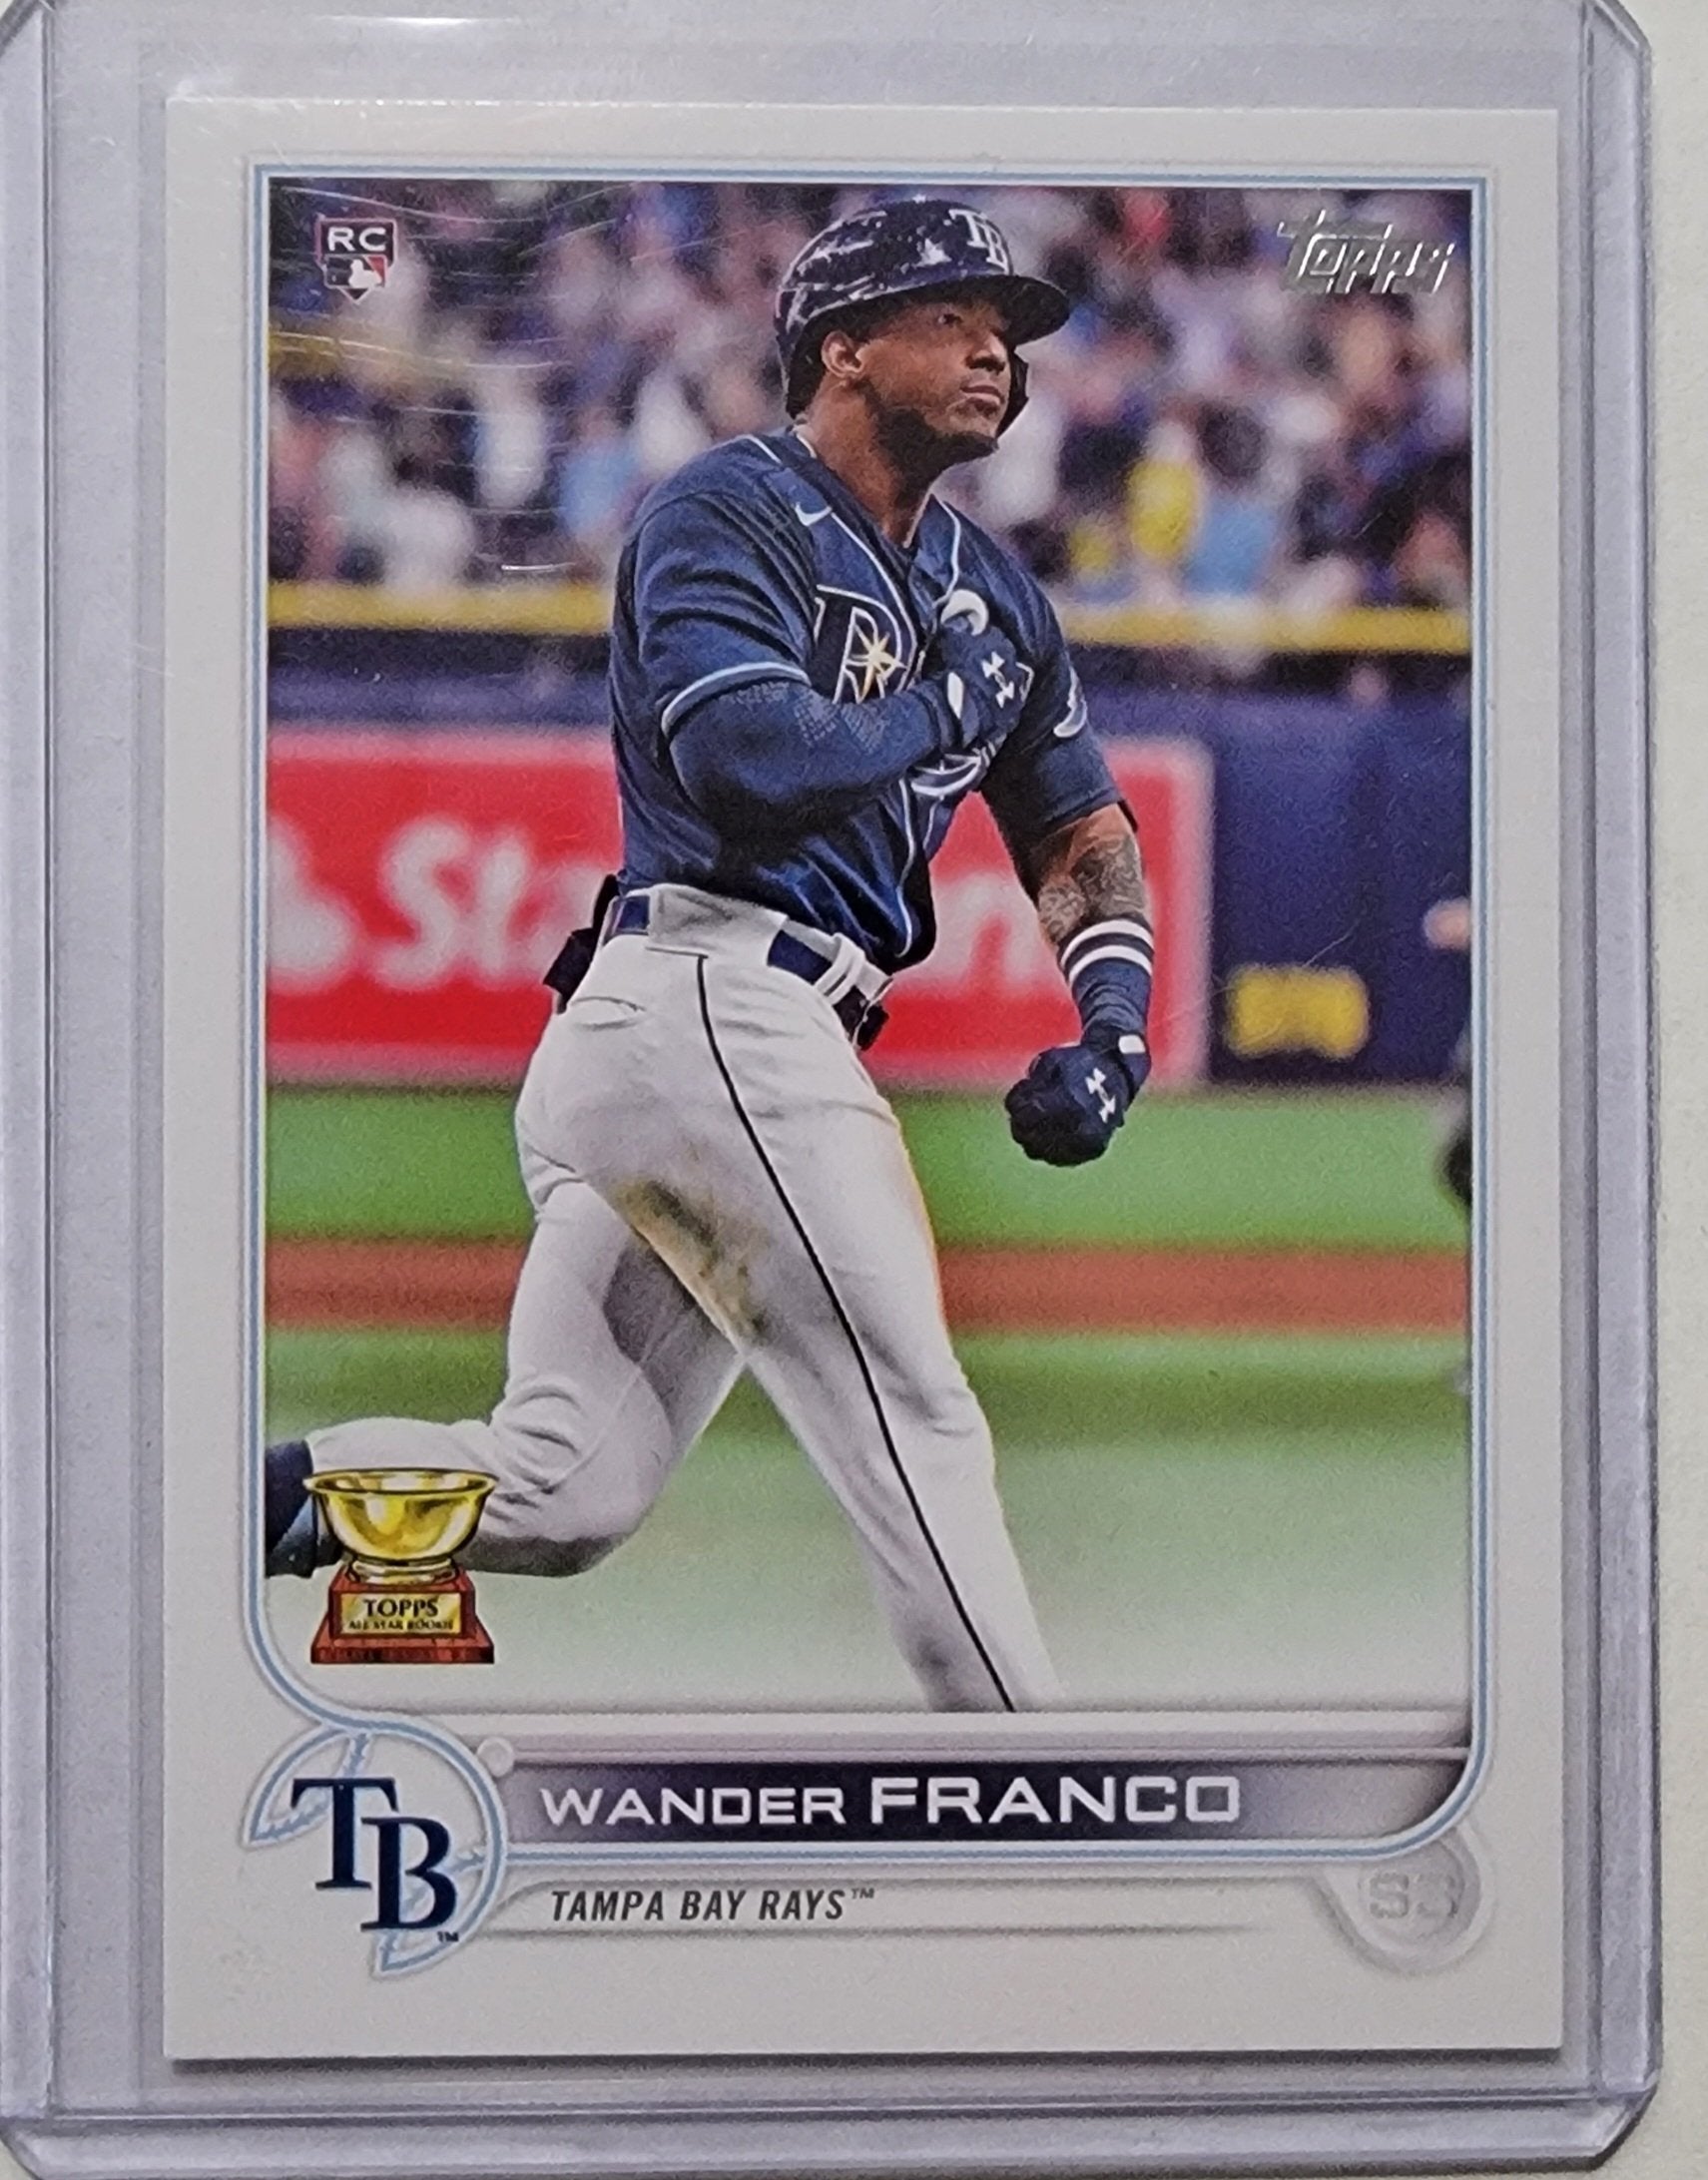 2022 Topps Wander Franco Rookie Cup All Star Baseball Card AVM1 simple Xclusive Collectibles   